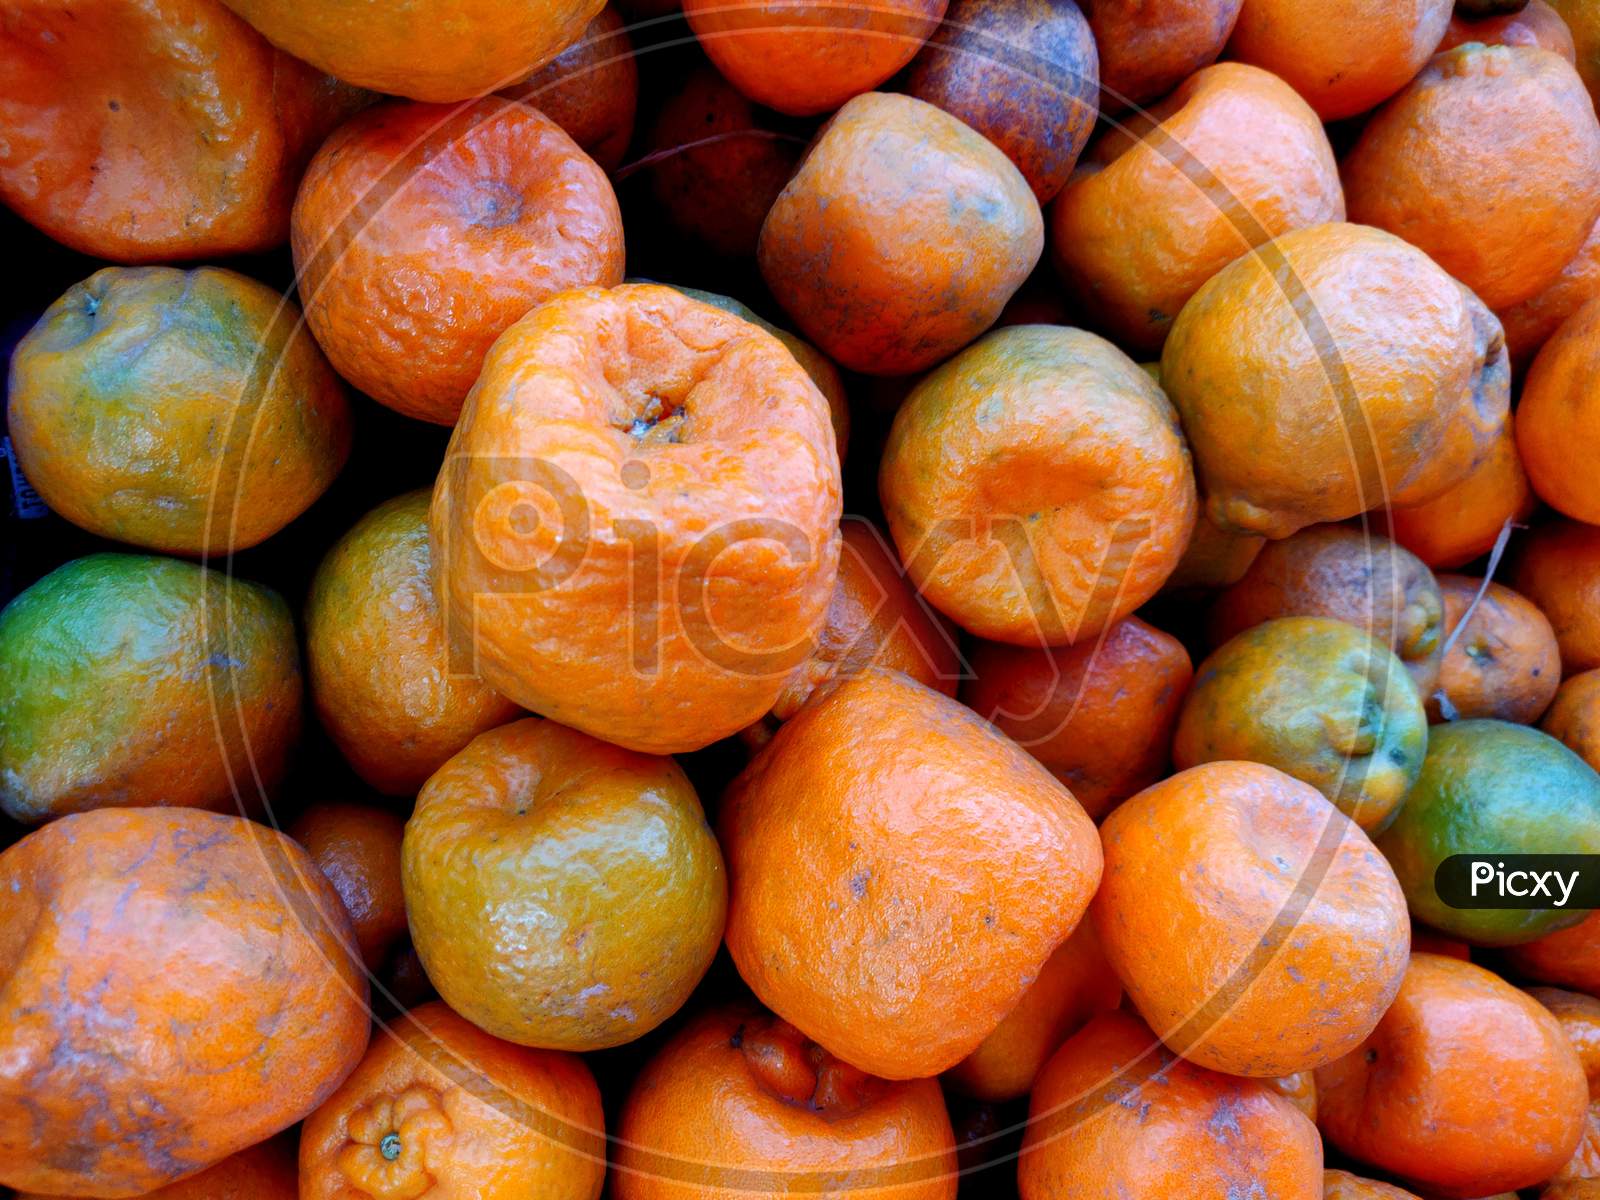 A Basket Full Of Orange That Is The Fruit Of Various Citrus Species In The Family Rutaceae; It Primarily Refers To Citrus × Sinensis, Which Is Also Called Sweet Orange.